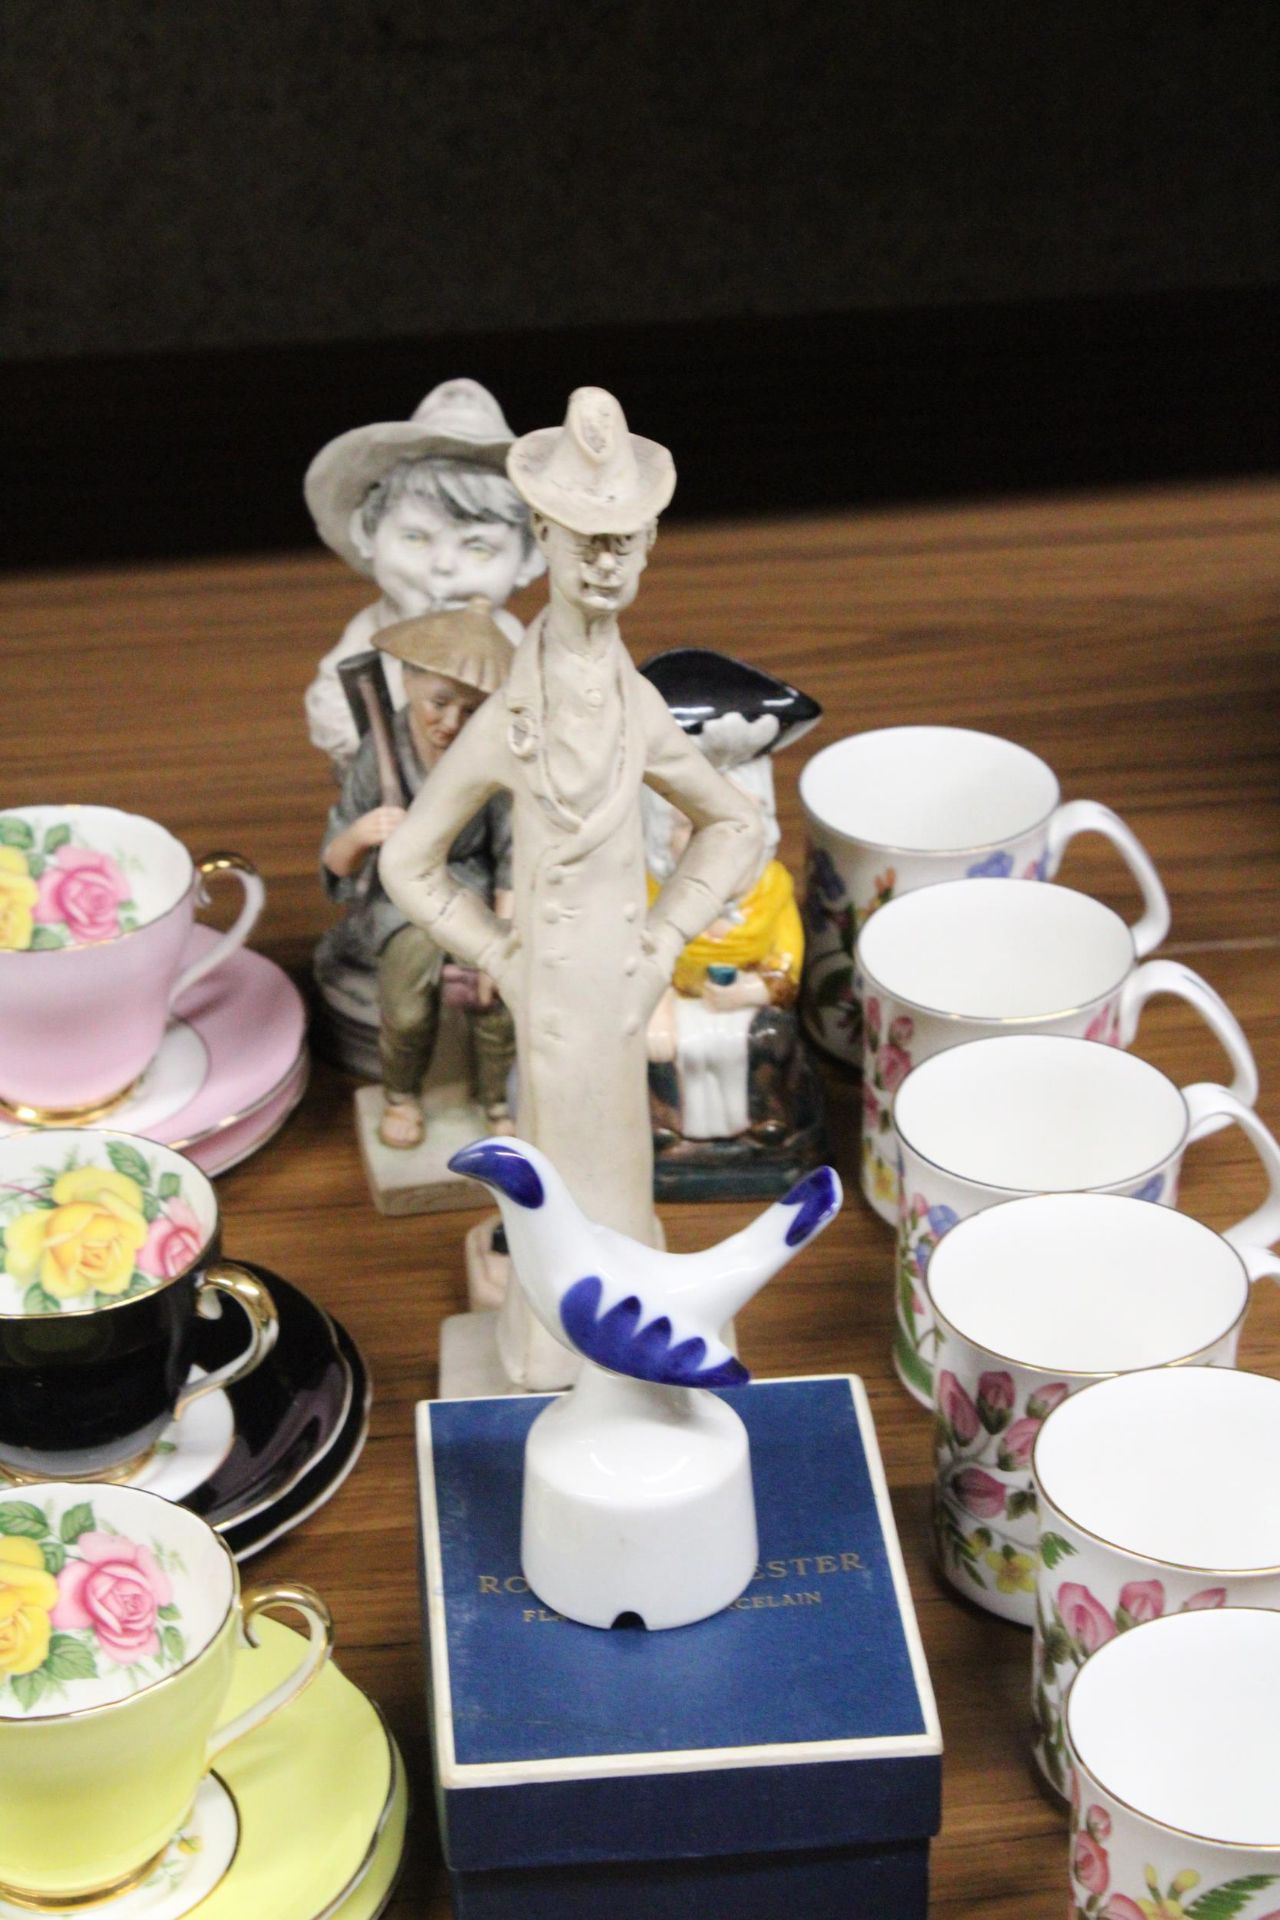 SIX IMPERIAL BONE CHINA TRIOS, SIX CHINA MUGS PLUS FIGURINES AND A BOXED ROYAL WORCESTER PIE FUNNEL - Image 4 of 6